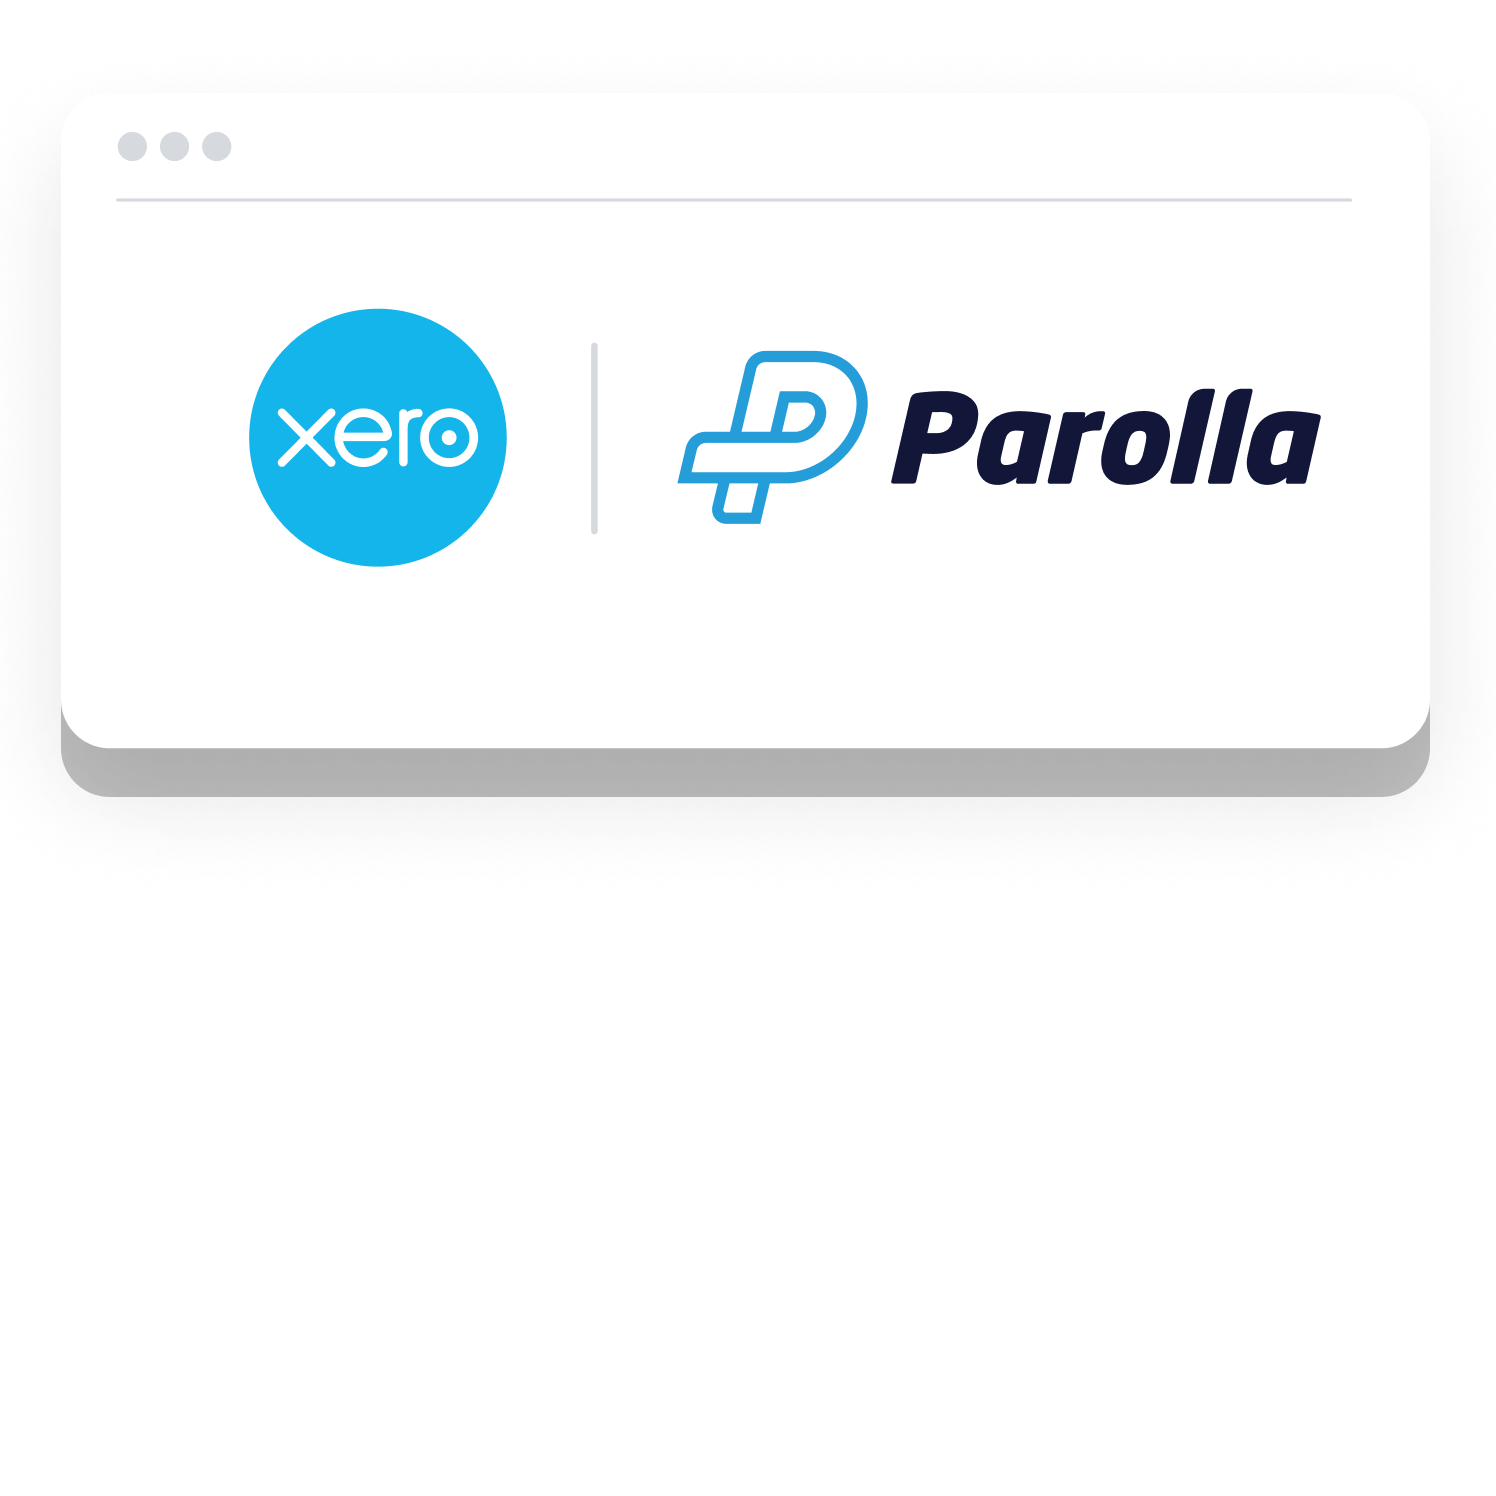 Example of apps that can share data with Xero